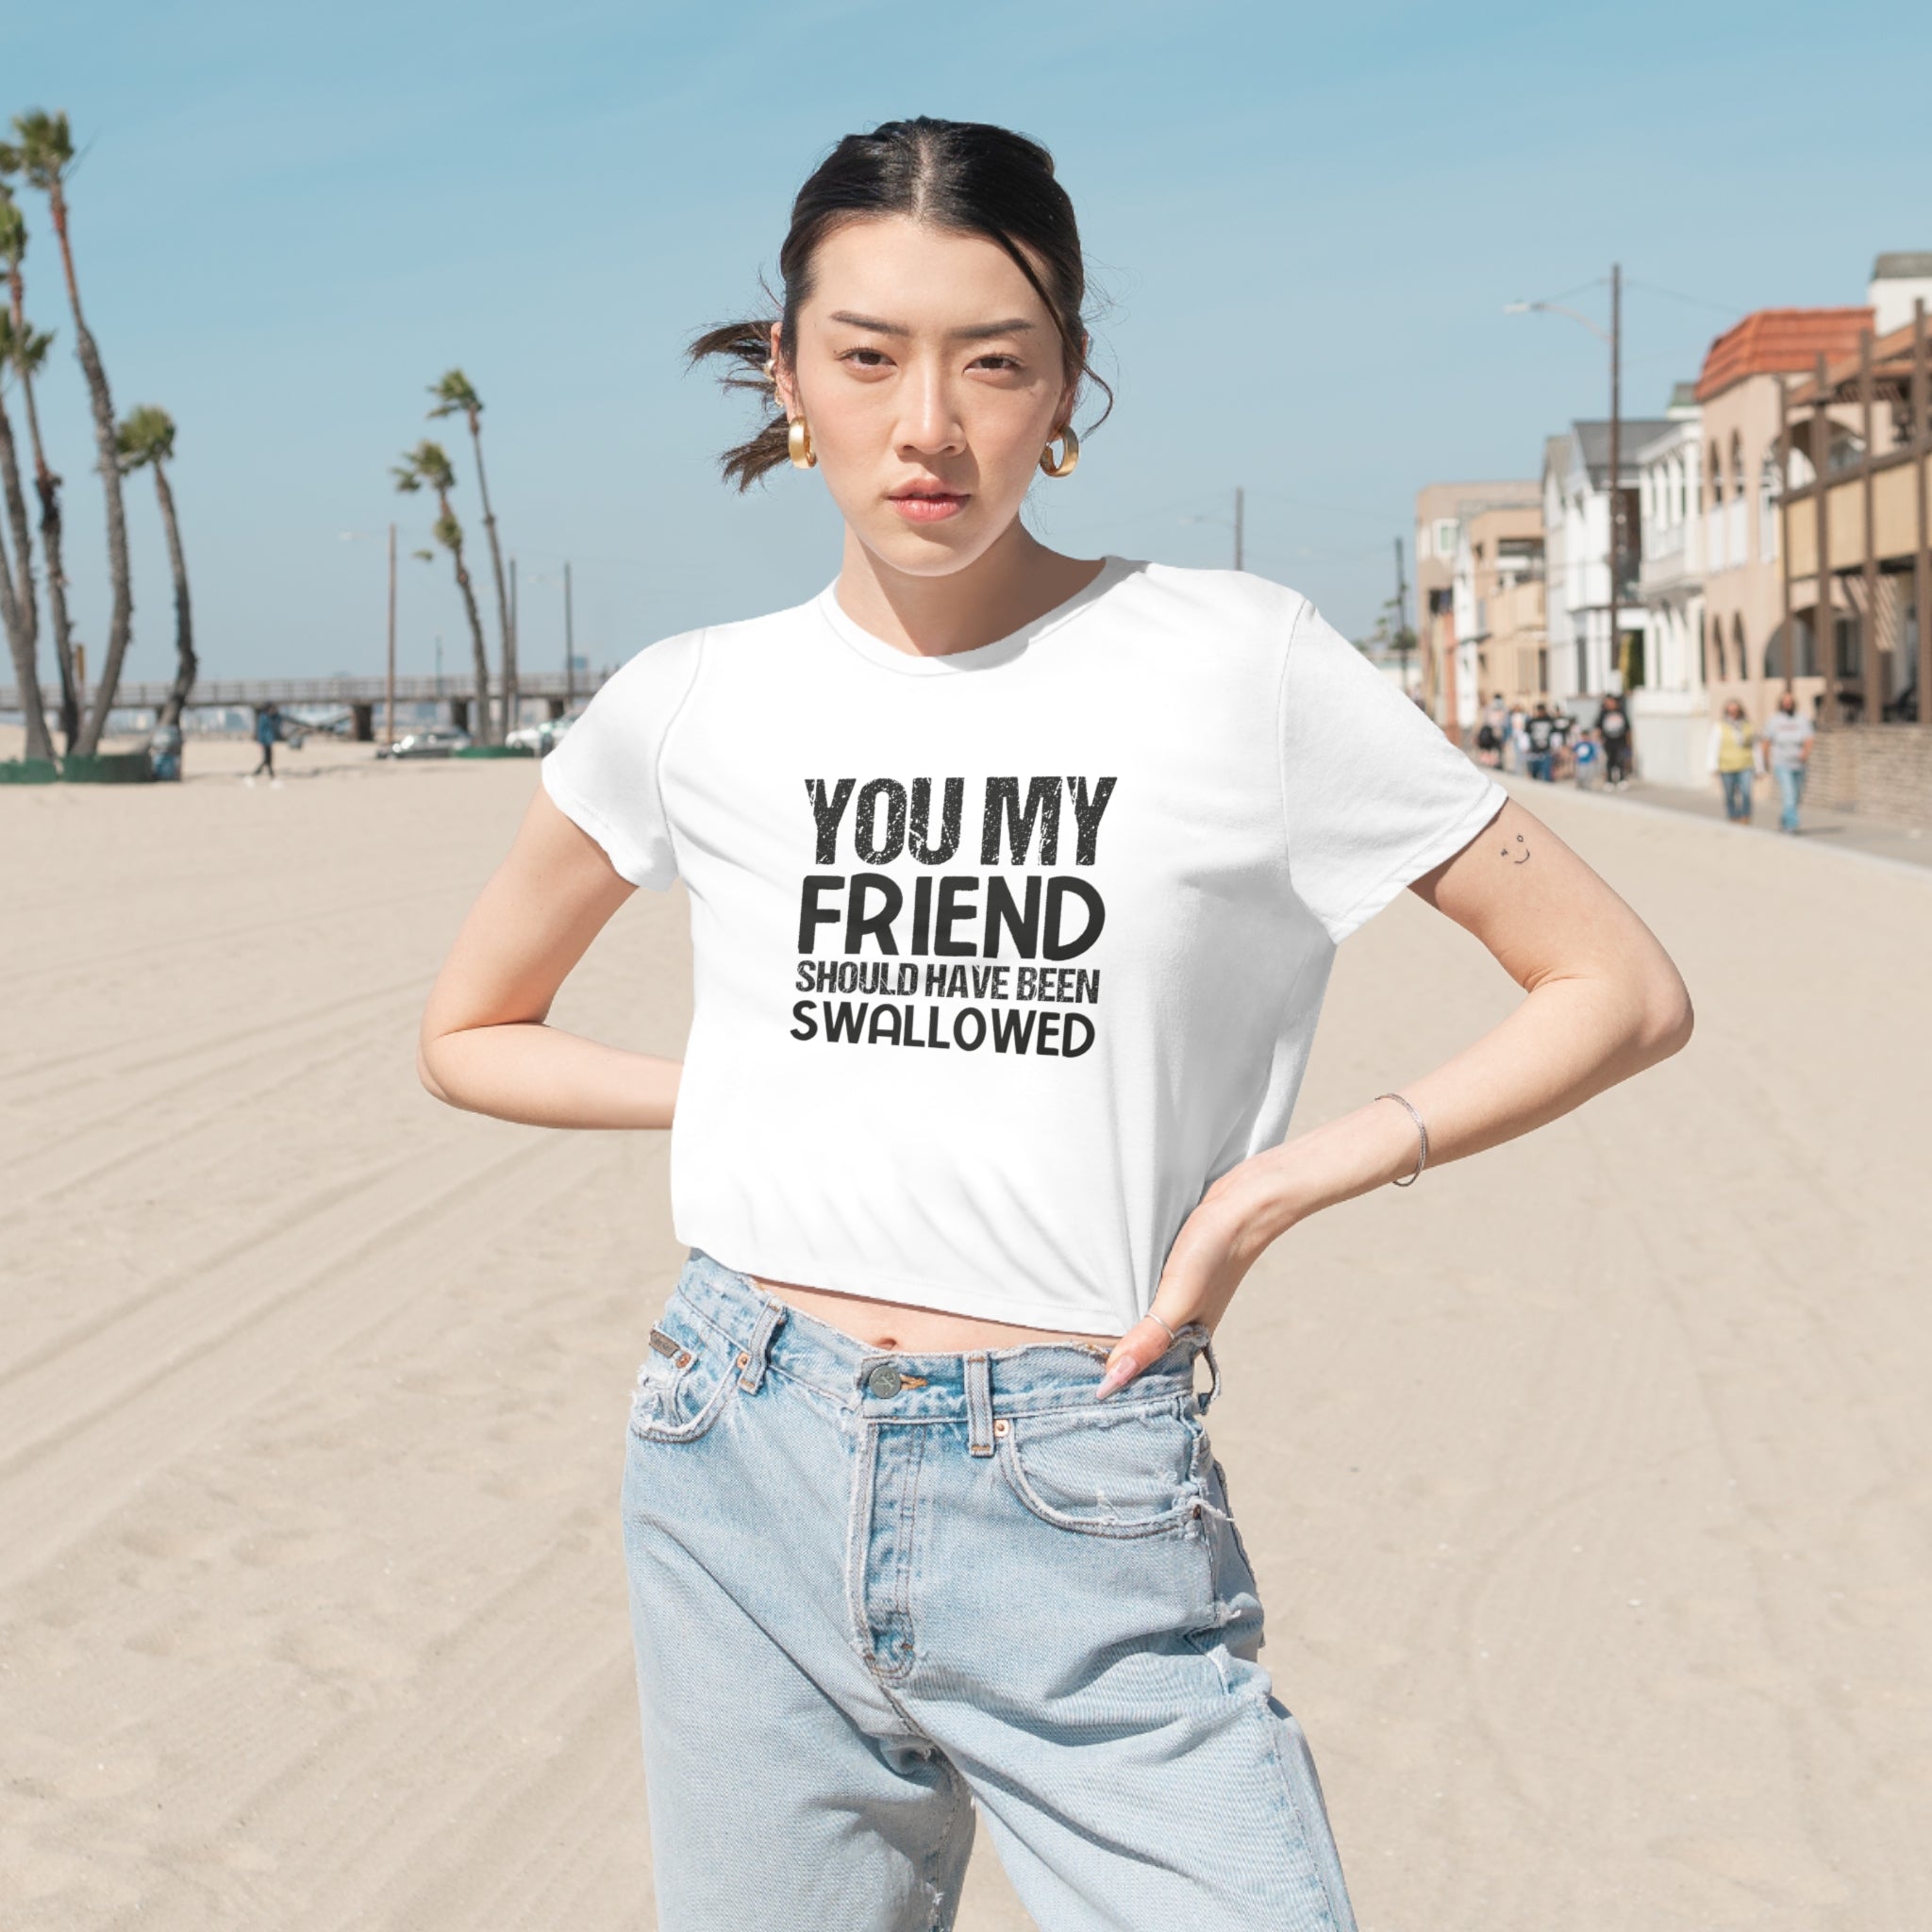 👚 Chic and Comfortable: Crafted from soft, flowy fabric, this cropped tee is designed for fashion-forward comfort. Its breezy and lightweight feel makes it ideal for hot summer days, casual outings, or whenever you want to add a playful touch to your look.